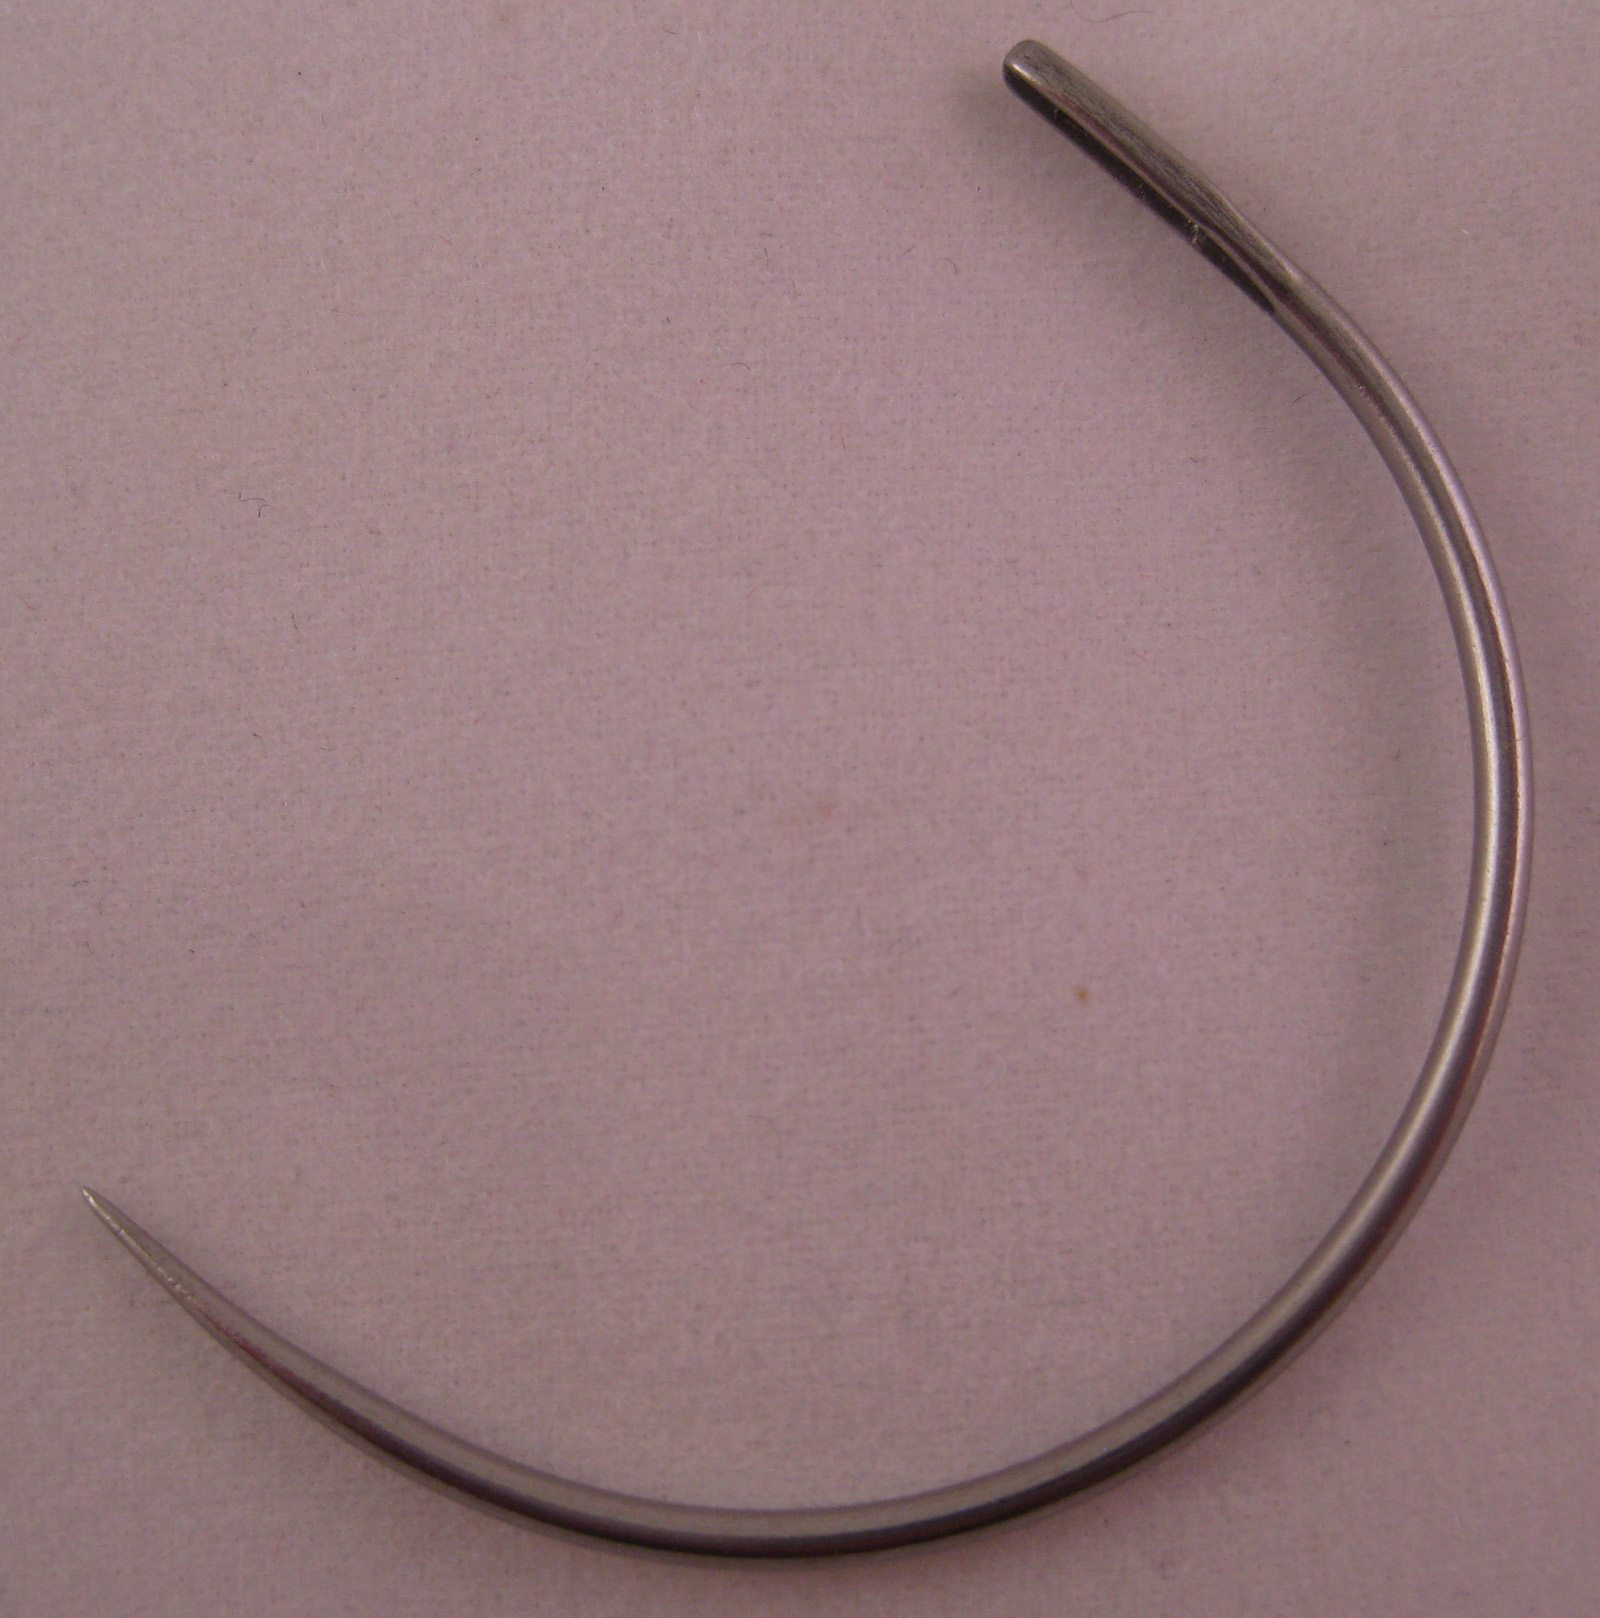  200X Curved Hand Sewing Needle 3 inch length General